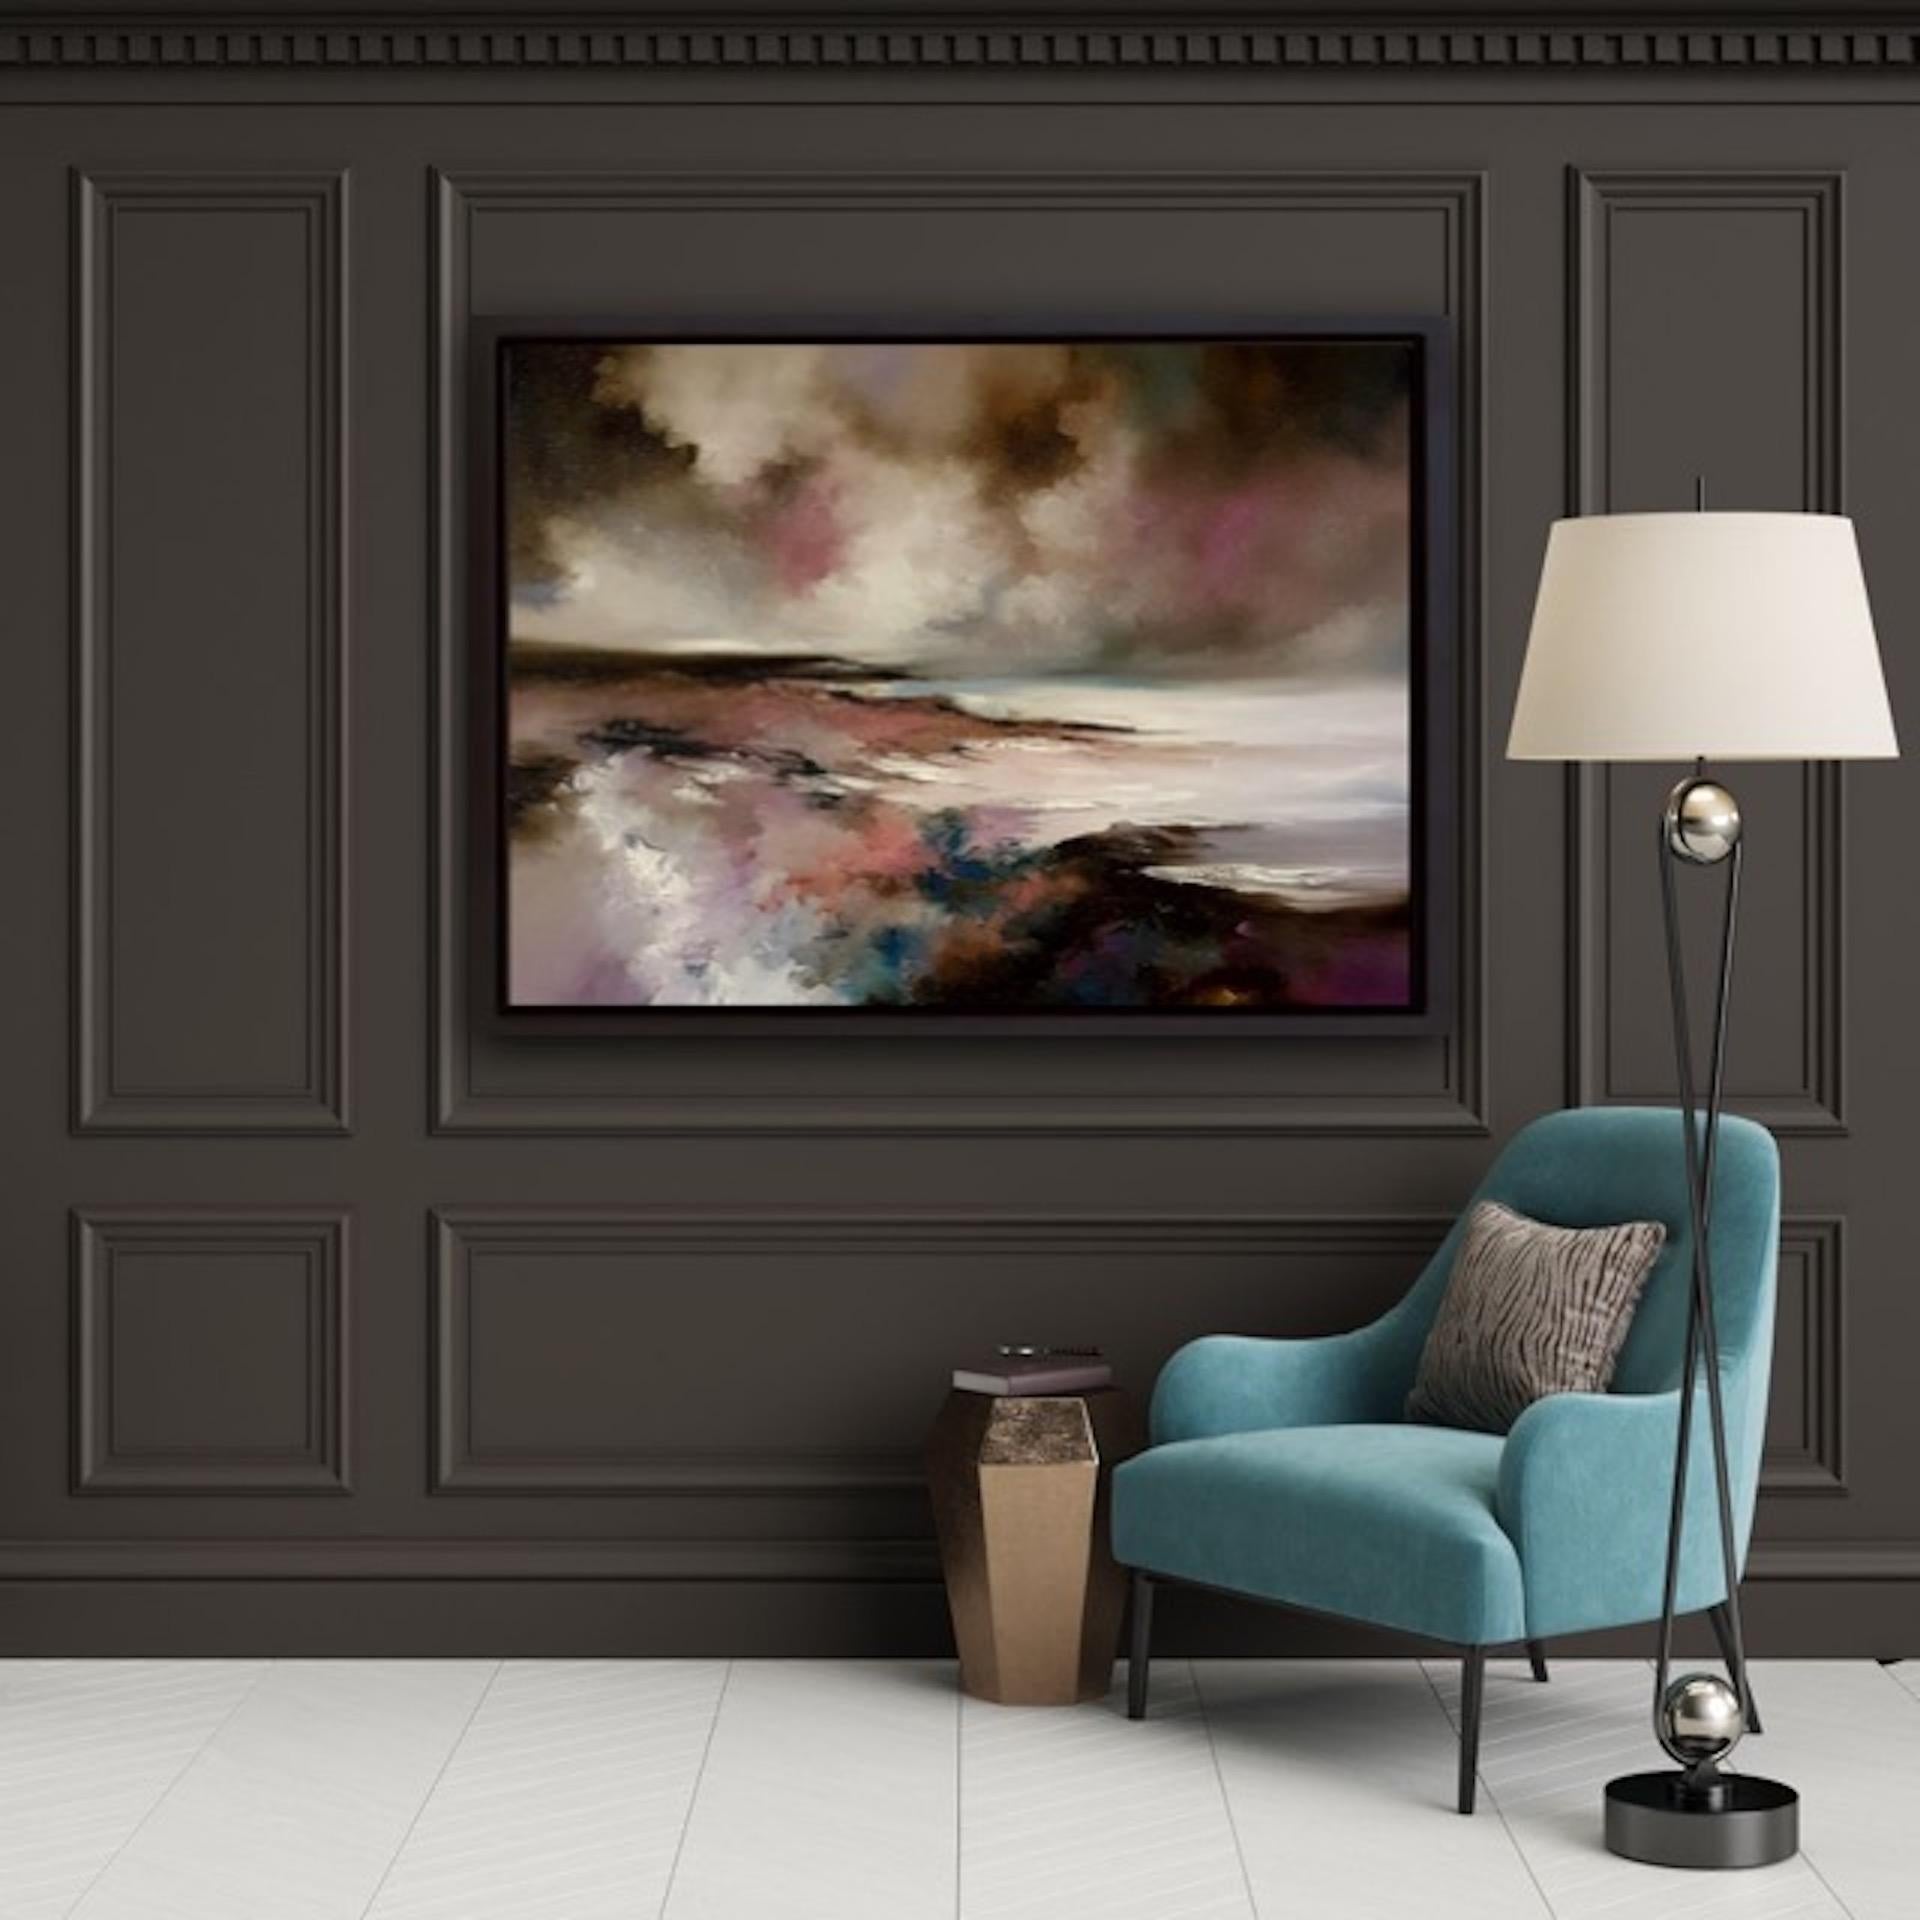 Alison Johnson
Beyond Reason
Original Seascape Painting
Oil on Canvas
Canvas Size: H 80cm x W 120cm x D 3cm
Sold Unframed
Please note that in situ images are purely an indication of how a piece may look.

Beyond Reason is an original painting by